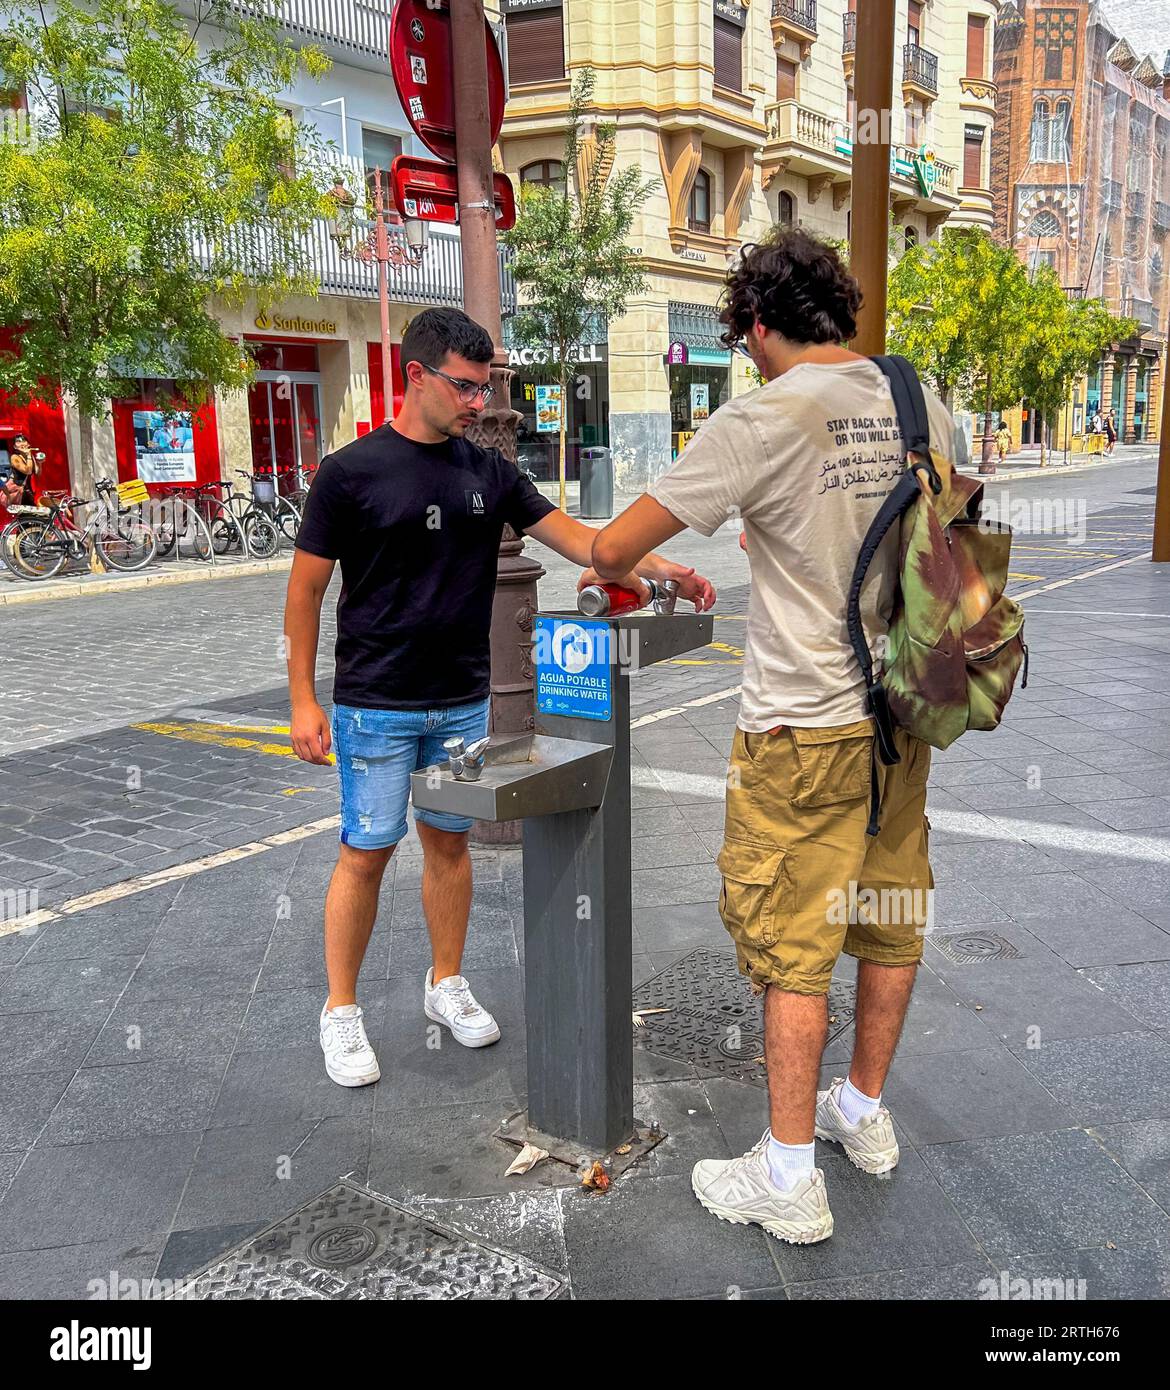 Seville, Spain, People Drinking Water on Hot Day, on Street Scene, in Old Town Center, Stock Photo